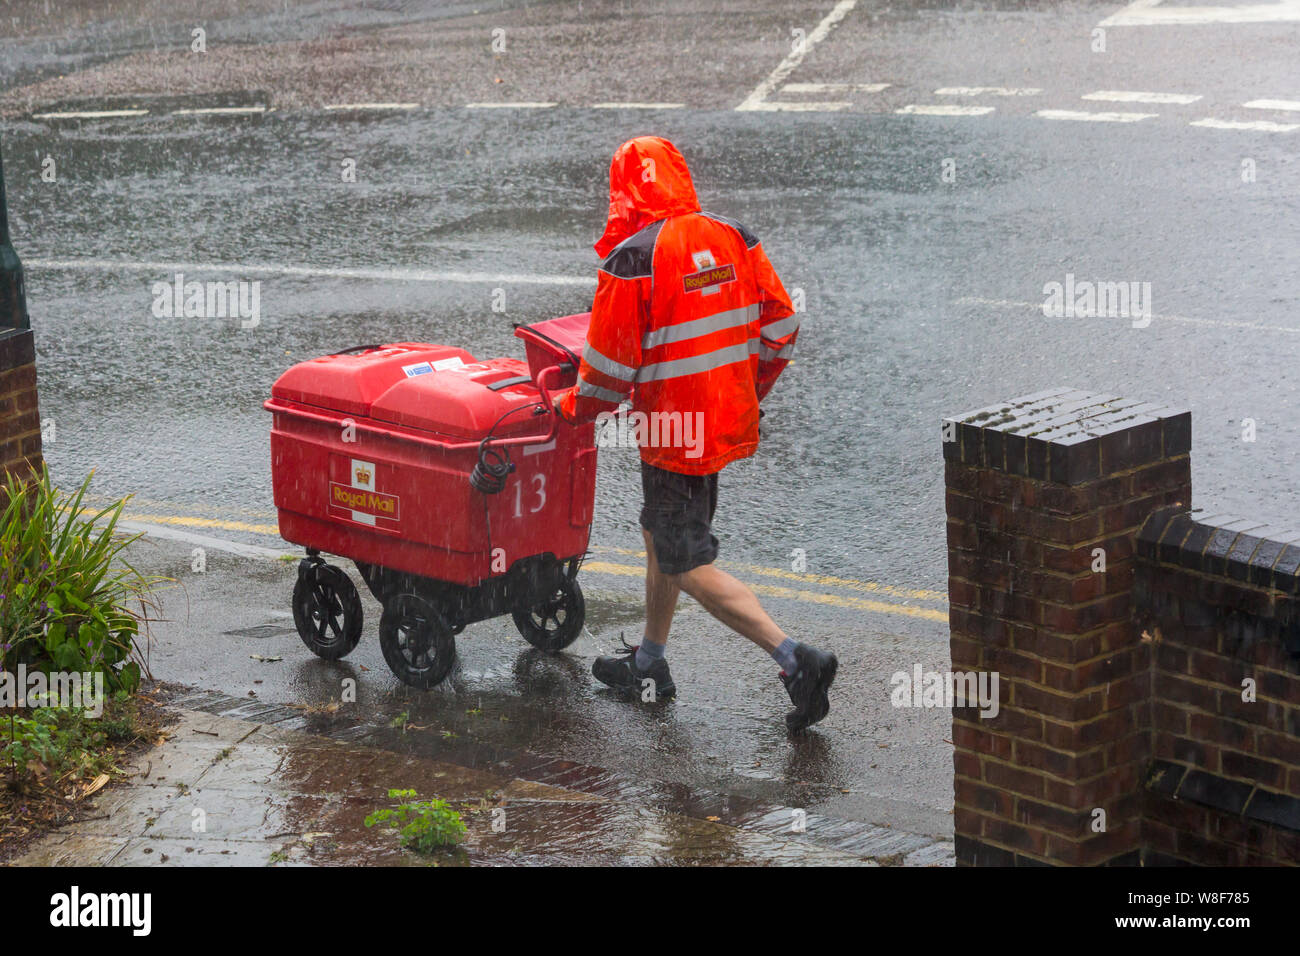 Bournemouth, Dorset UK. 9th Aug 2019. UK weather: the bad weather has arrived as torrential rain falls in Bournemouth. Postman wearing shorts hurries on his rounds regardless of the weather!  Credit: Carolyn Jenkins/Alamy Live News Stock Photo